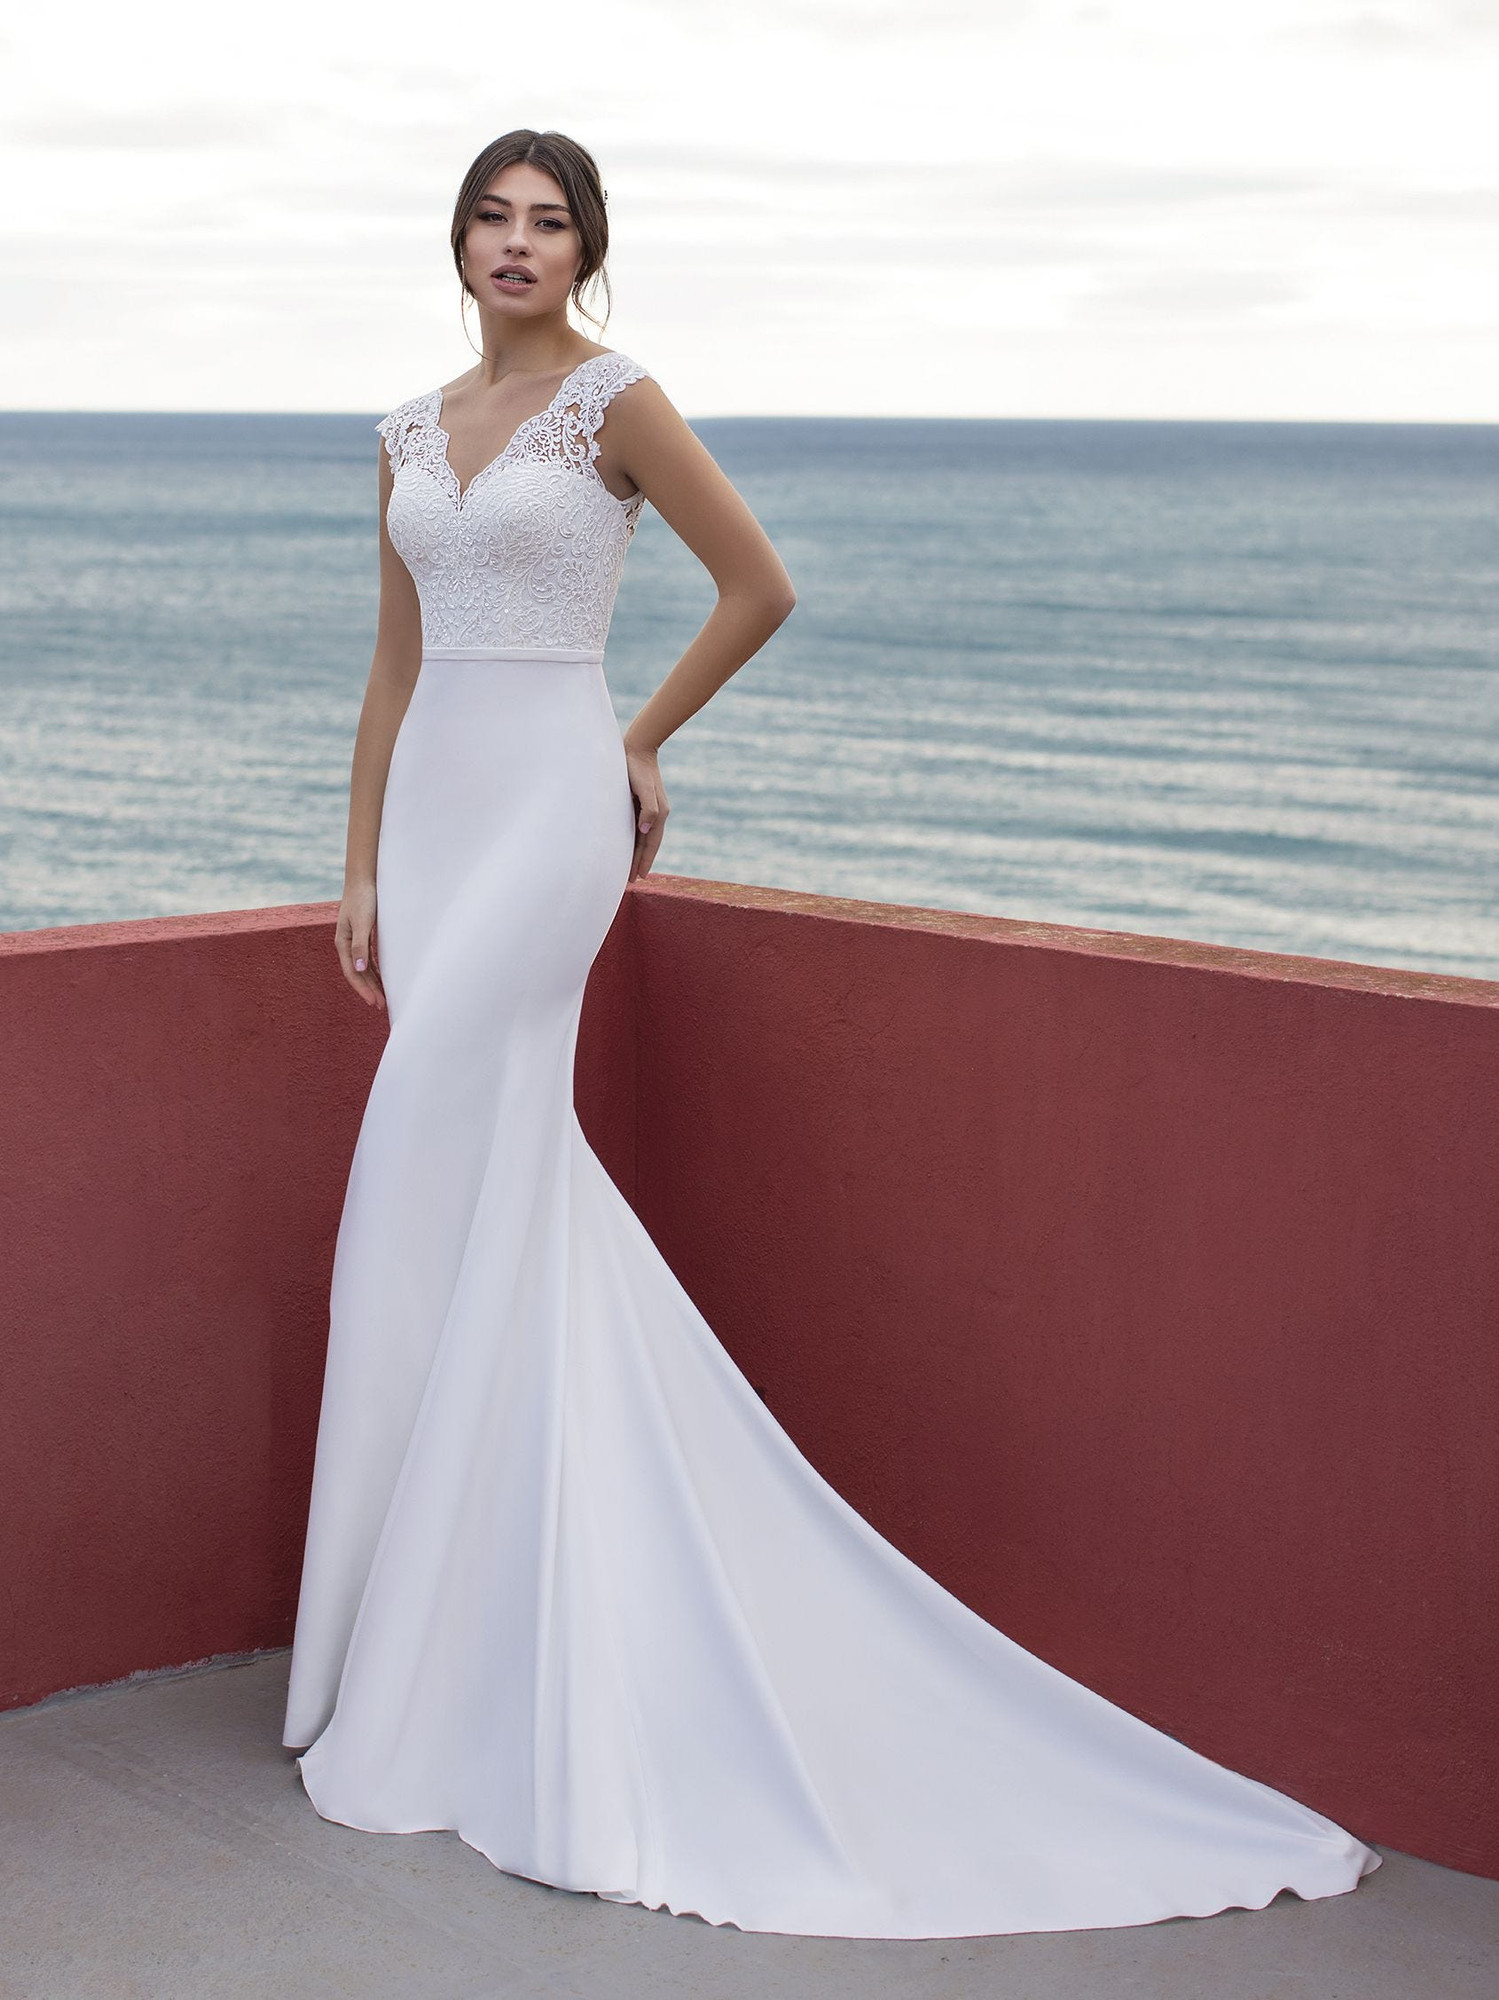 Mermaid Wedding Dresses & Bridal Gowns - Page 5 | hitched.co.uk